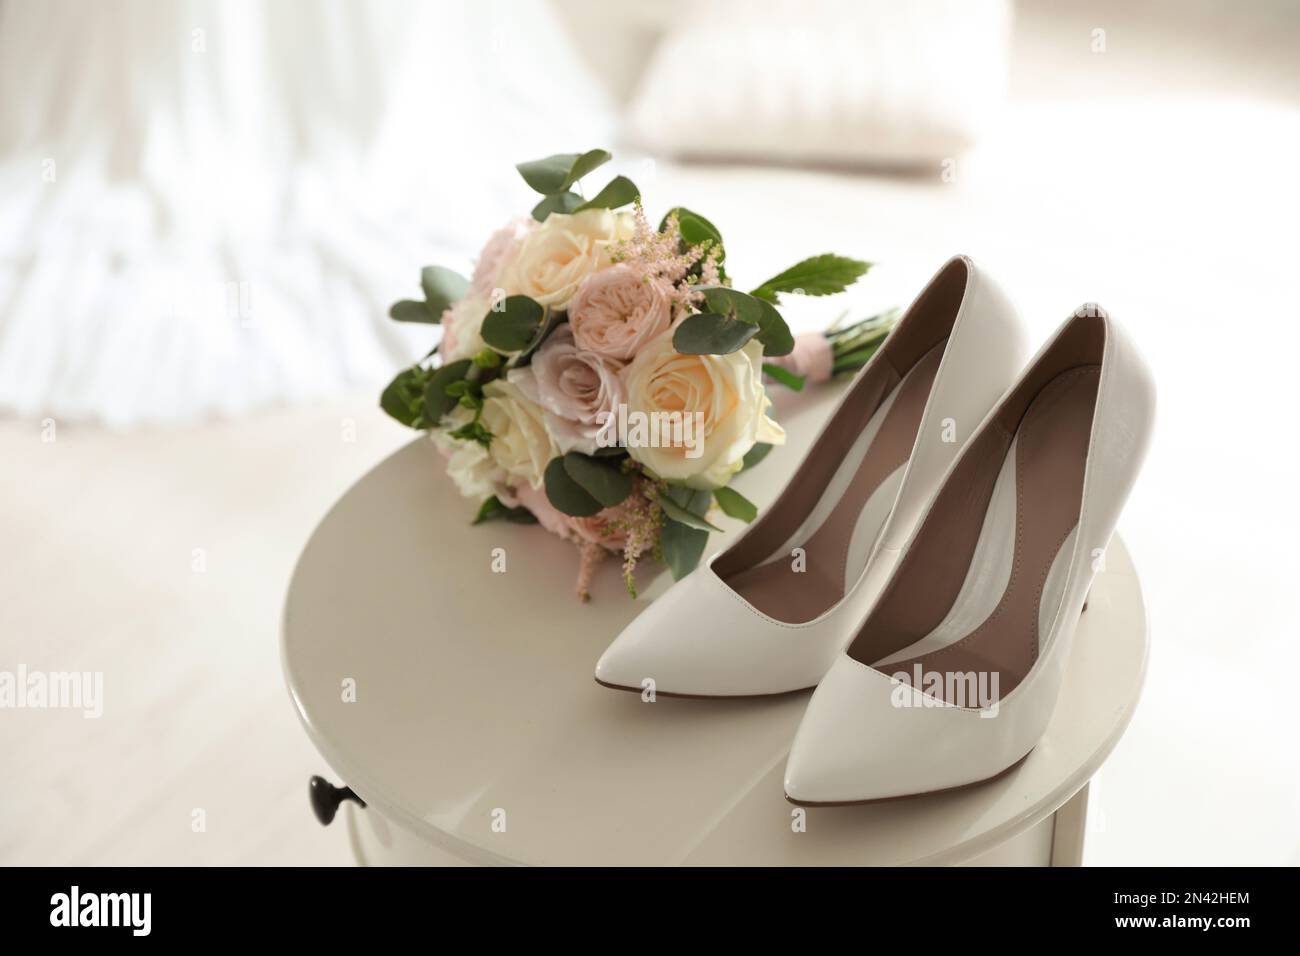 Pair of wedding high heel shoes and beautiful bouquet on white table Stock Photo